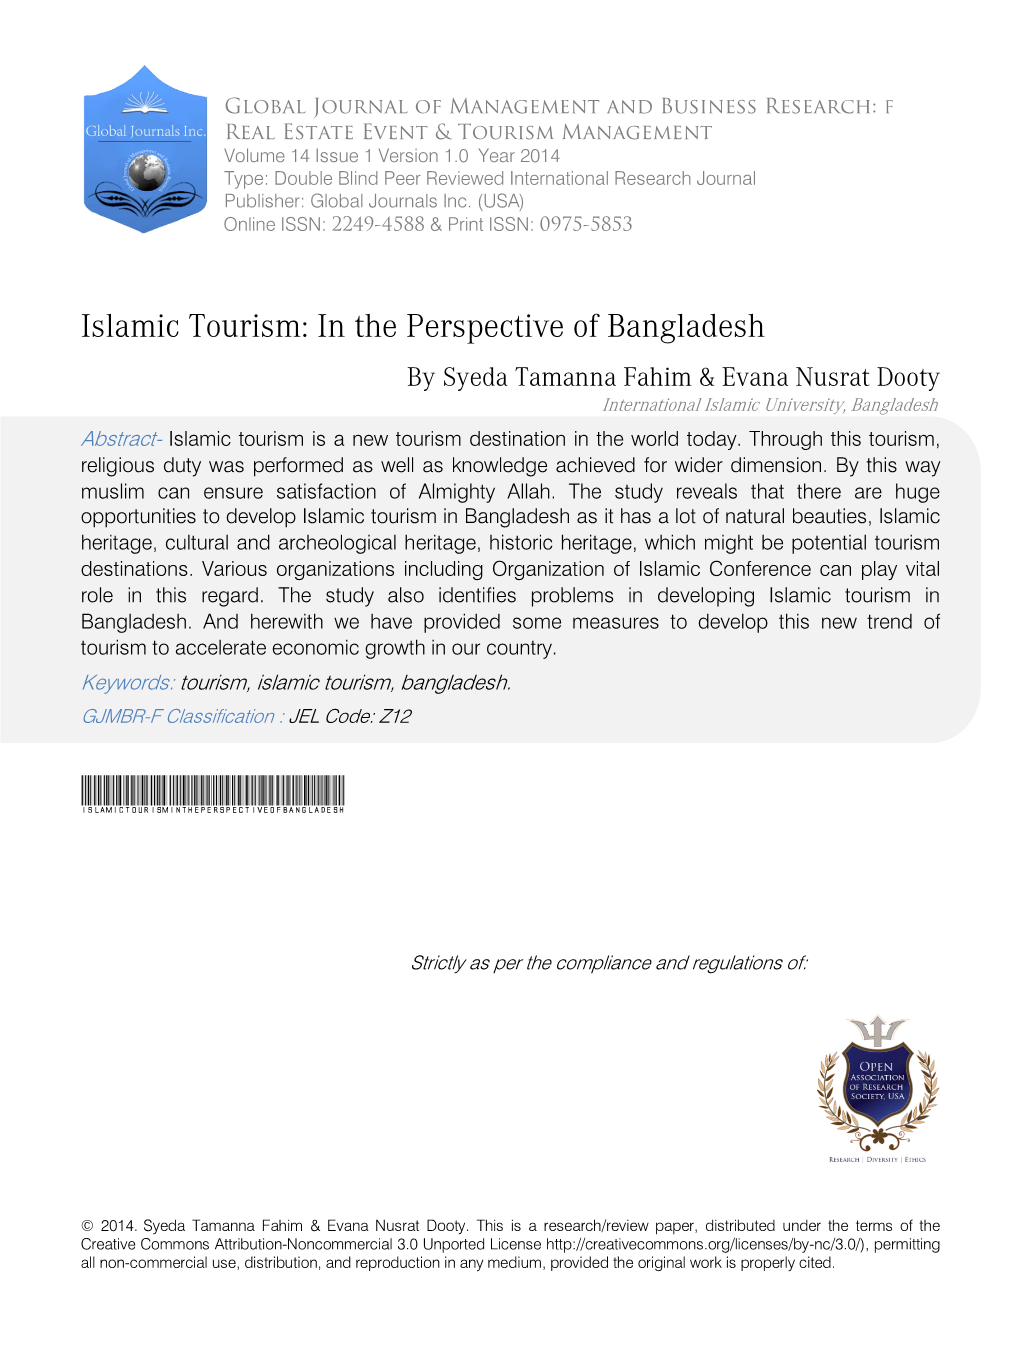 Islamic Tourism: in the Perspective of Bangladesh